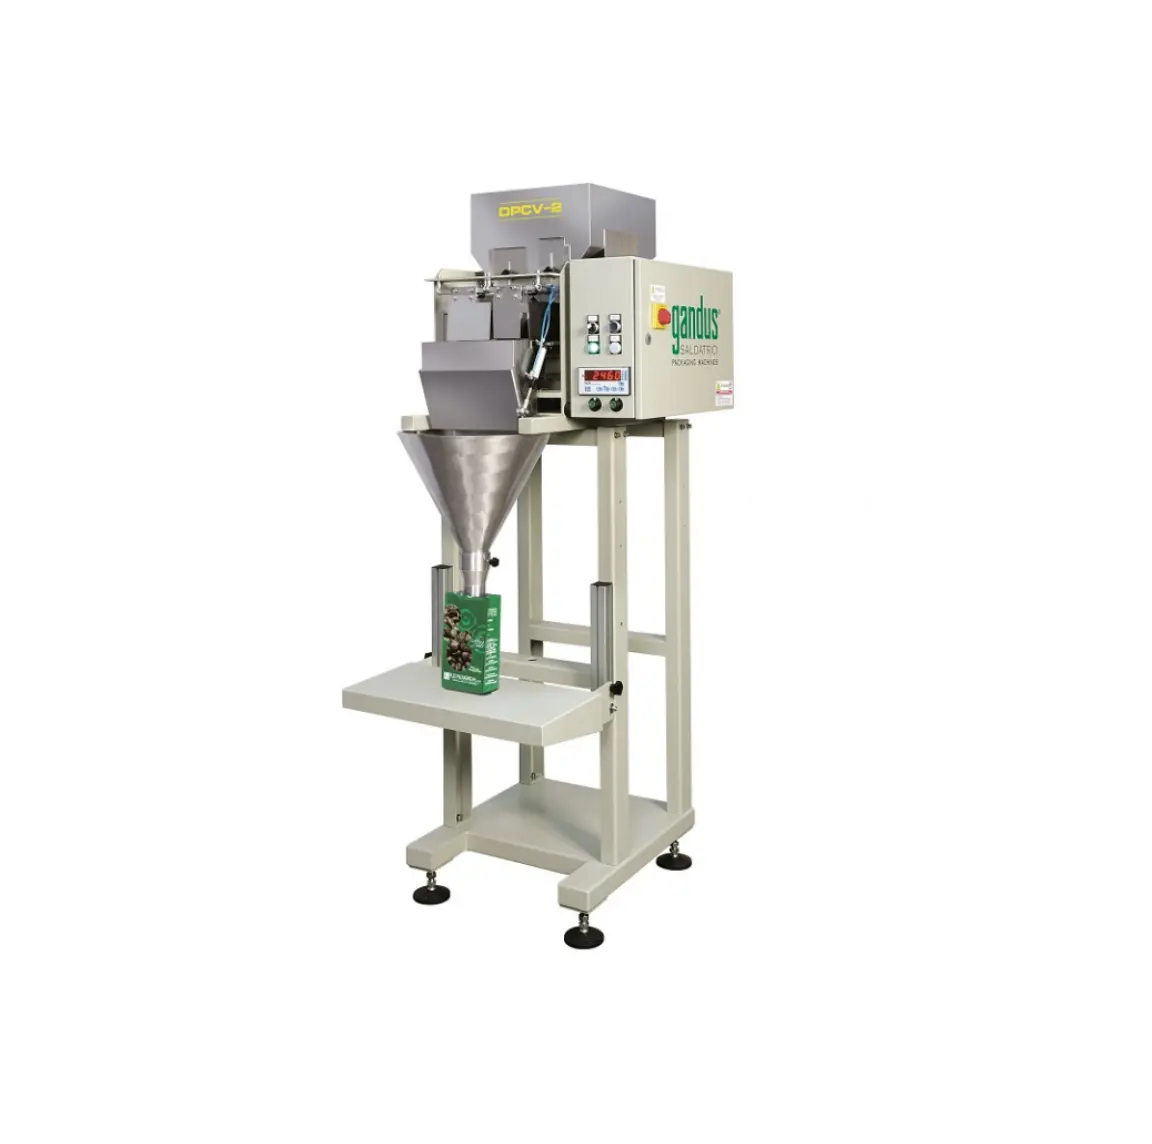 Gandus Semi Automatic Electronic Weighers For Dosing And Filling Of Preformed Bags And Containers